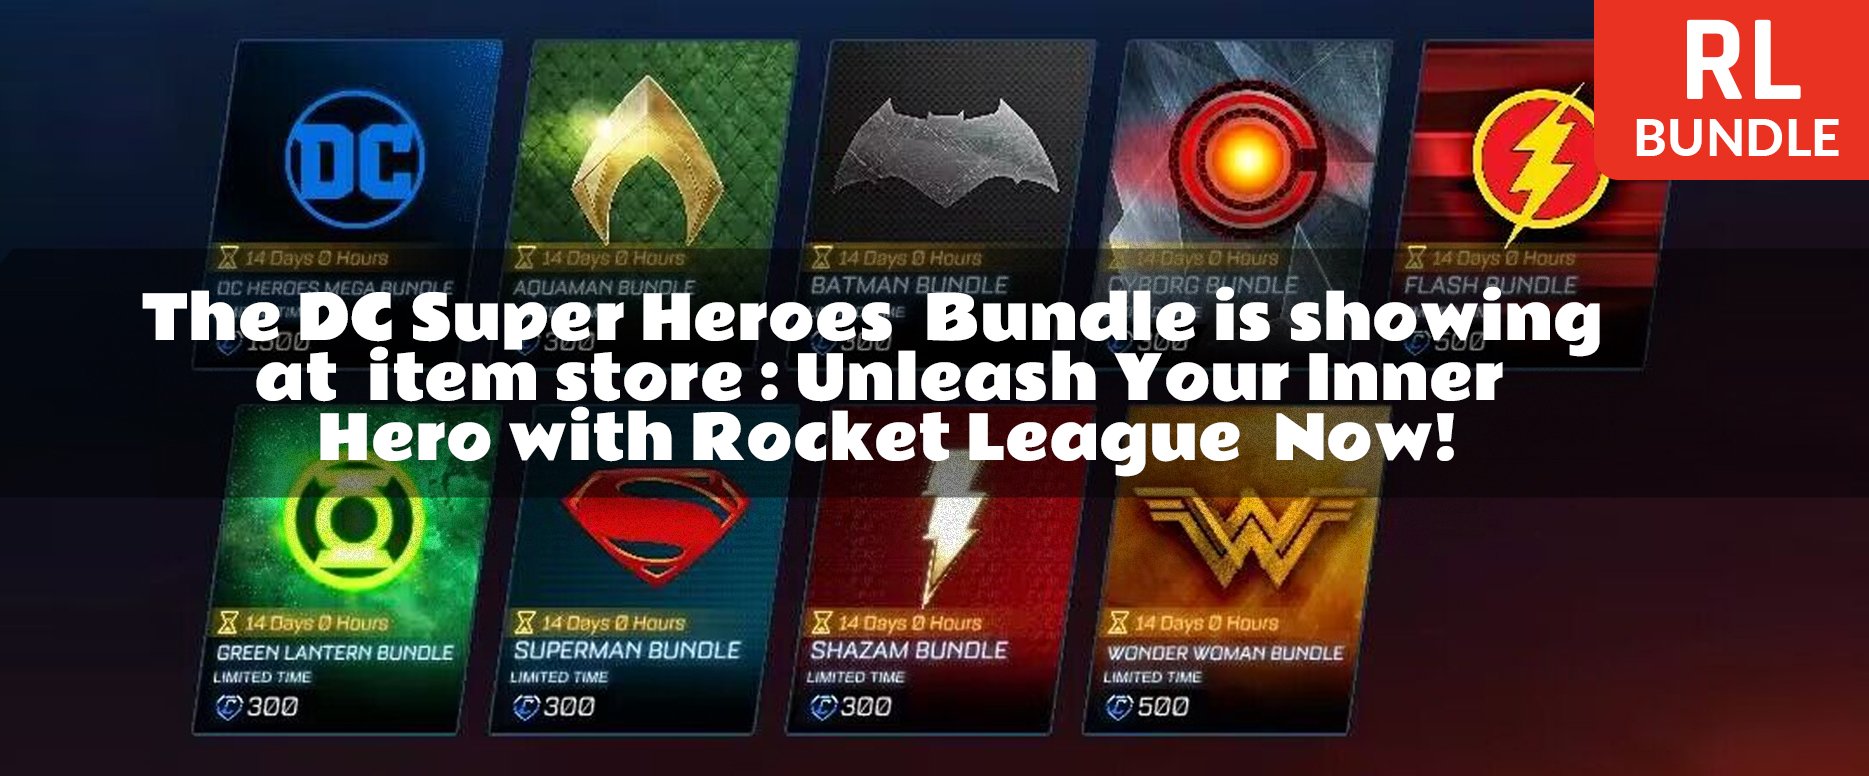 The DC Super Heroes  Bundle is showing  at  item store : Unleash Your Inner Hero with Rocket League  Now!